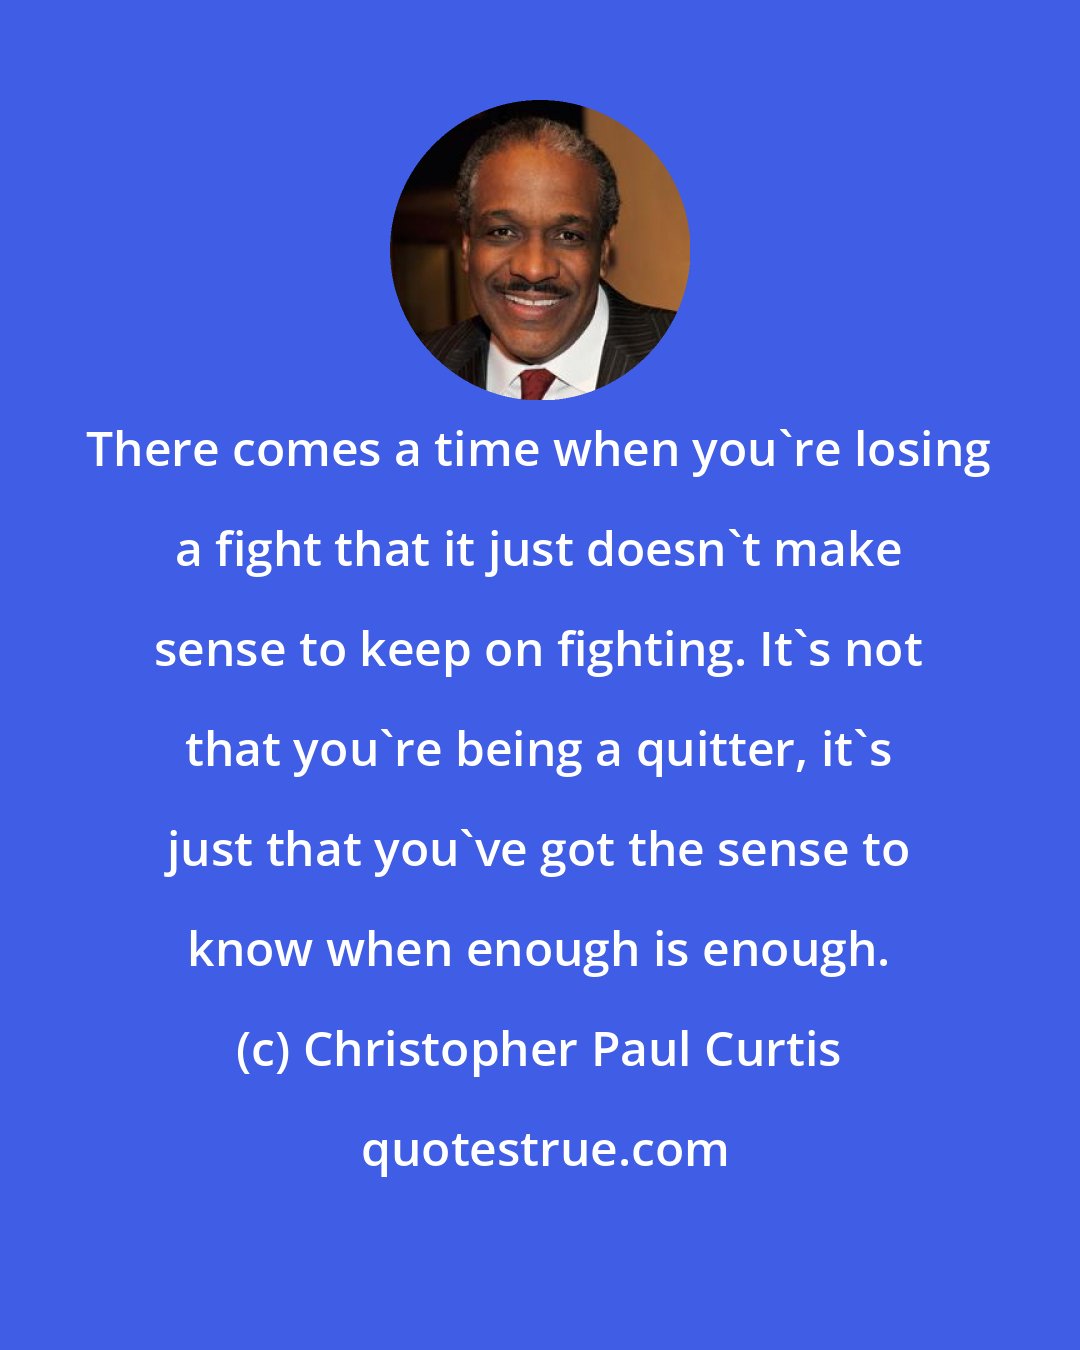 Christopher Paul Curtis: There comes a time when you're losing a fight that it just doesn't make sense to keep on fighting. It's not that you're being a quitter, it's just that you've got the sense to know when enough is enough.